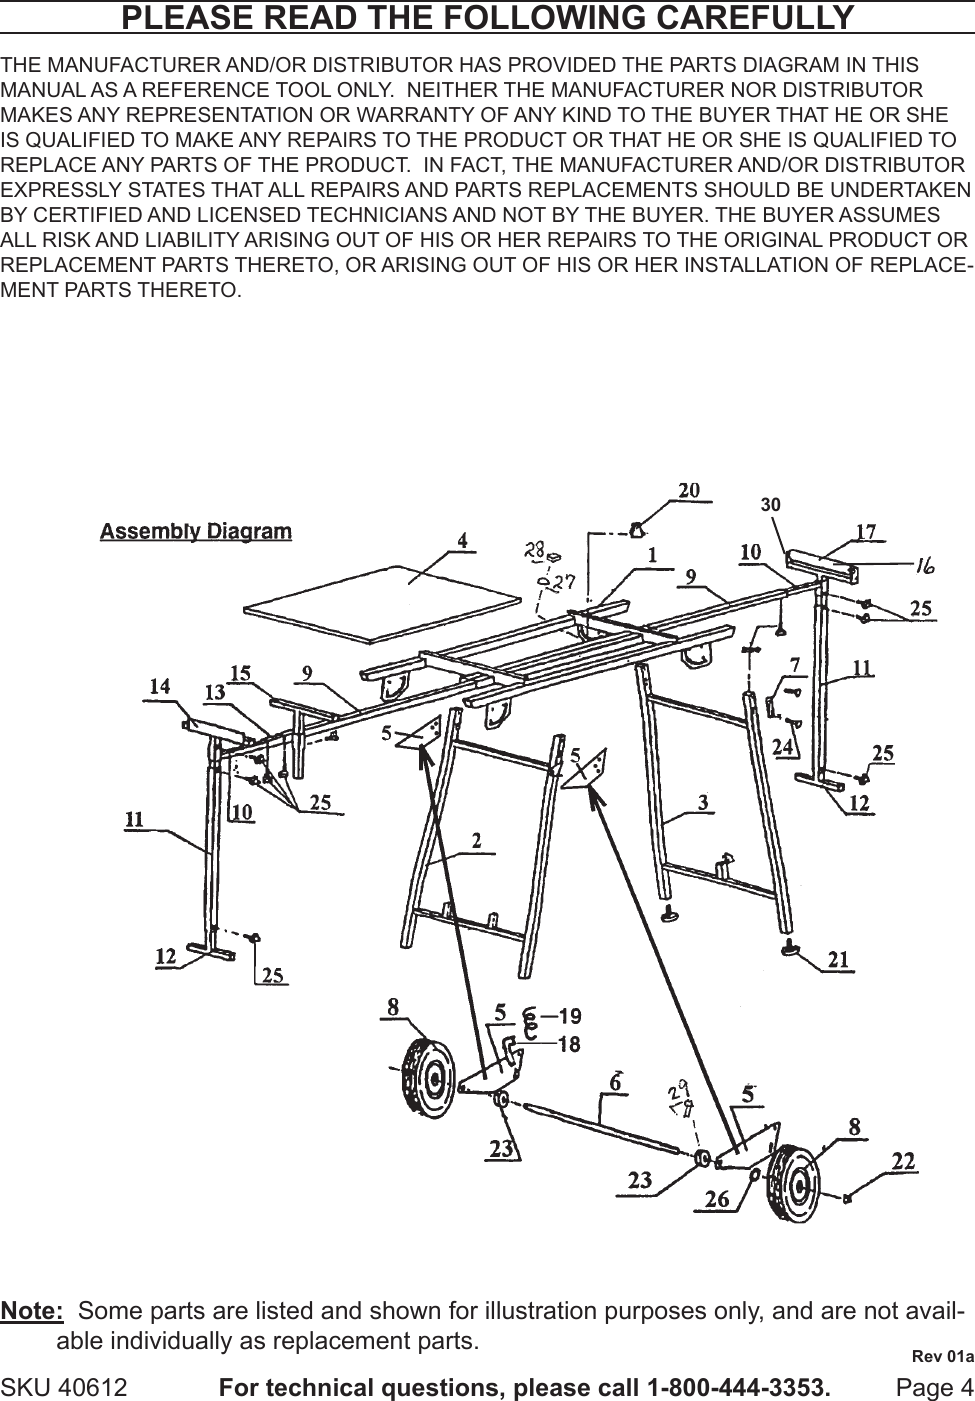 Page 4 of 5 - Harbor-Freight Harbor-Freight-Mobile-Folding-Power-Tool-Stand-Product-Manual-  Harbor-freight-mobile-folding-power-tool-stand-product-manual